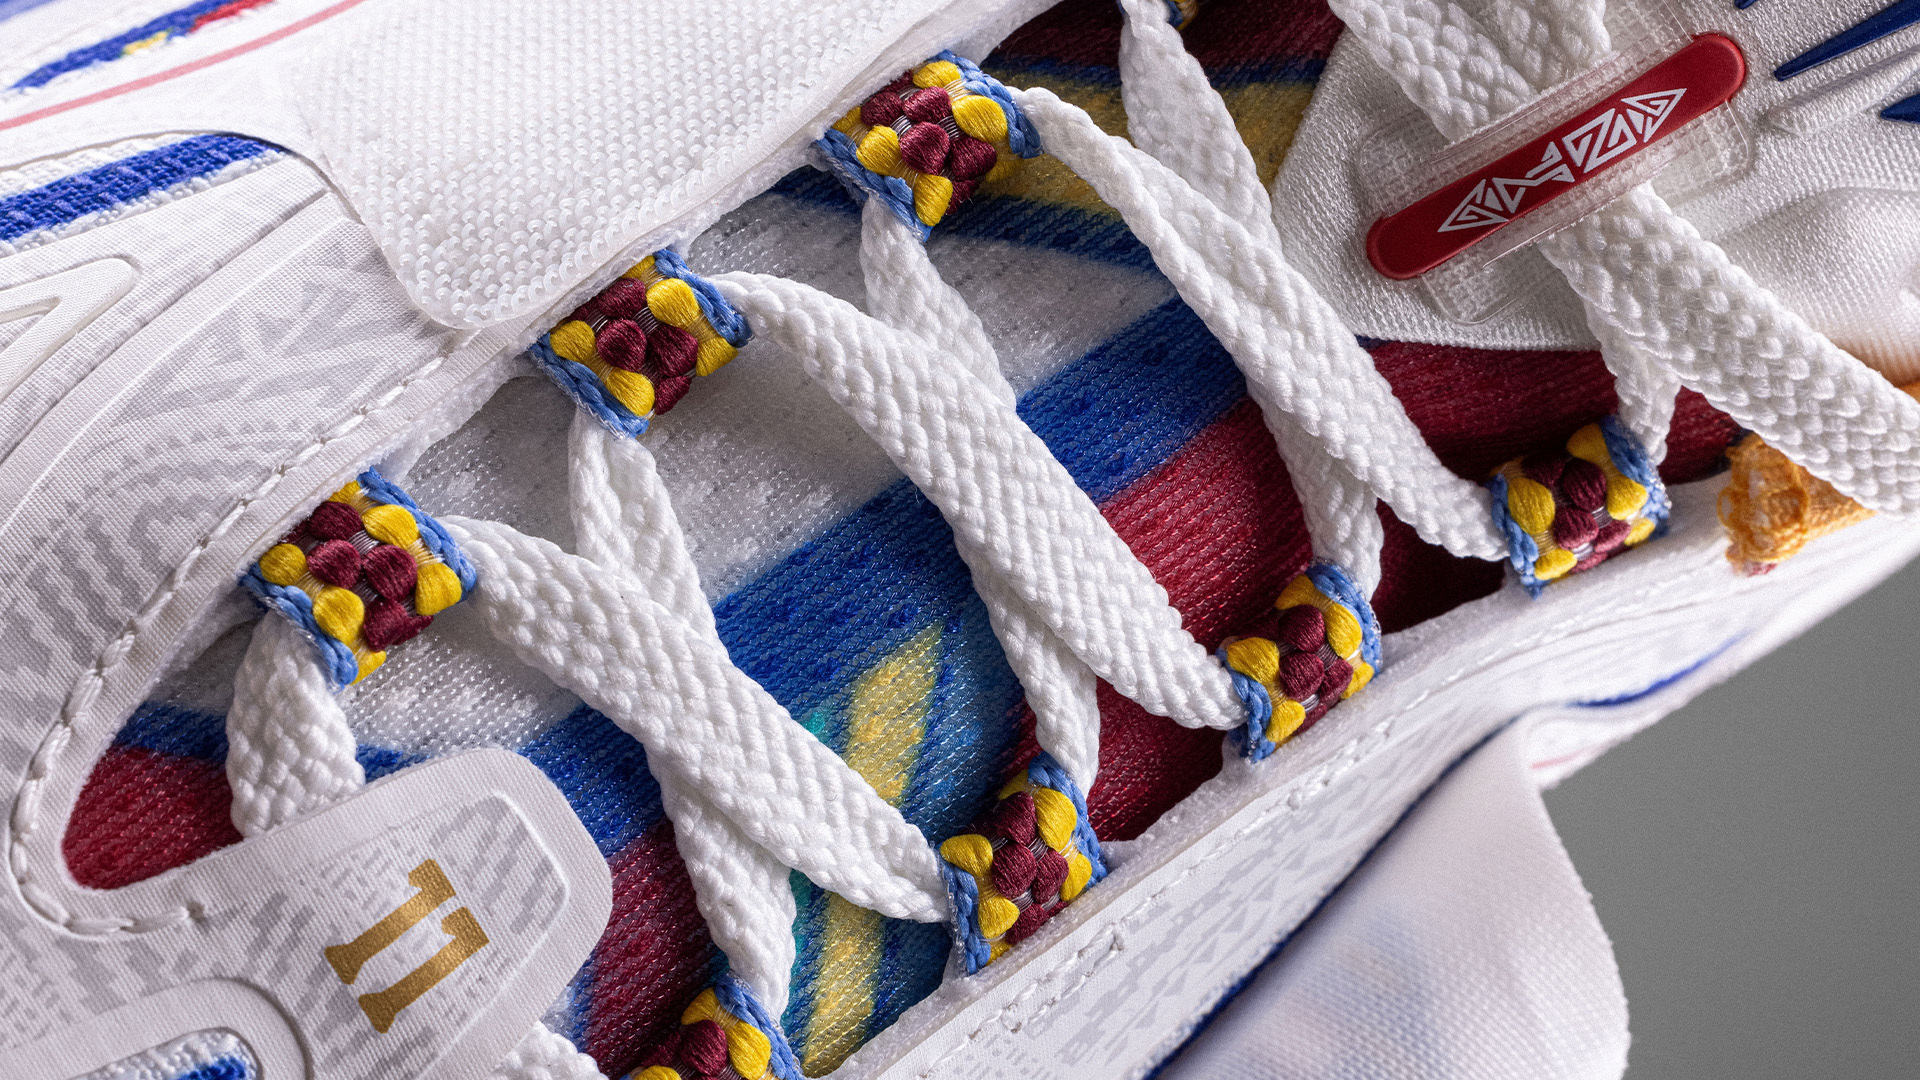 Close-up of a sneaker showcasing its intricate white lacing and multicolored fabric